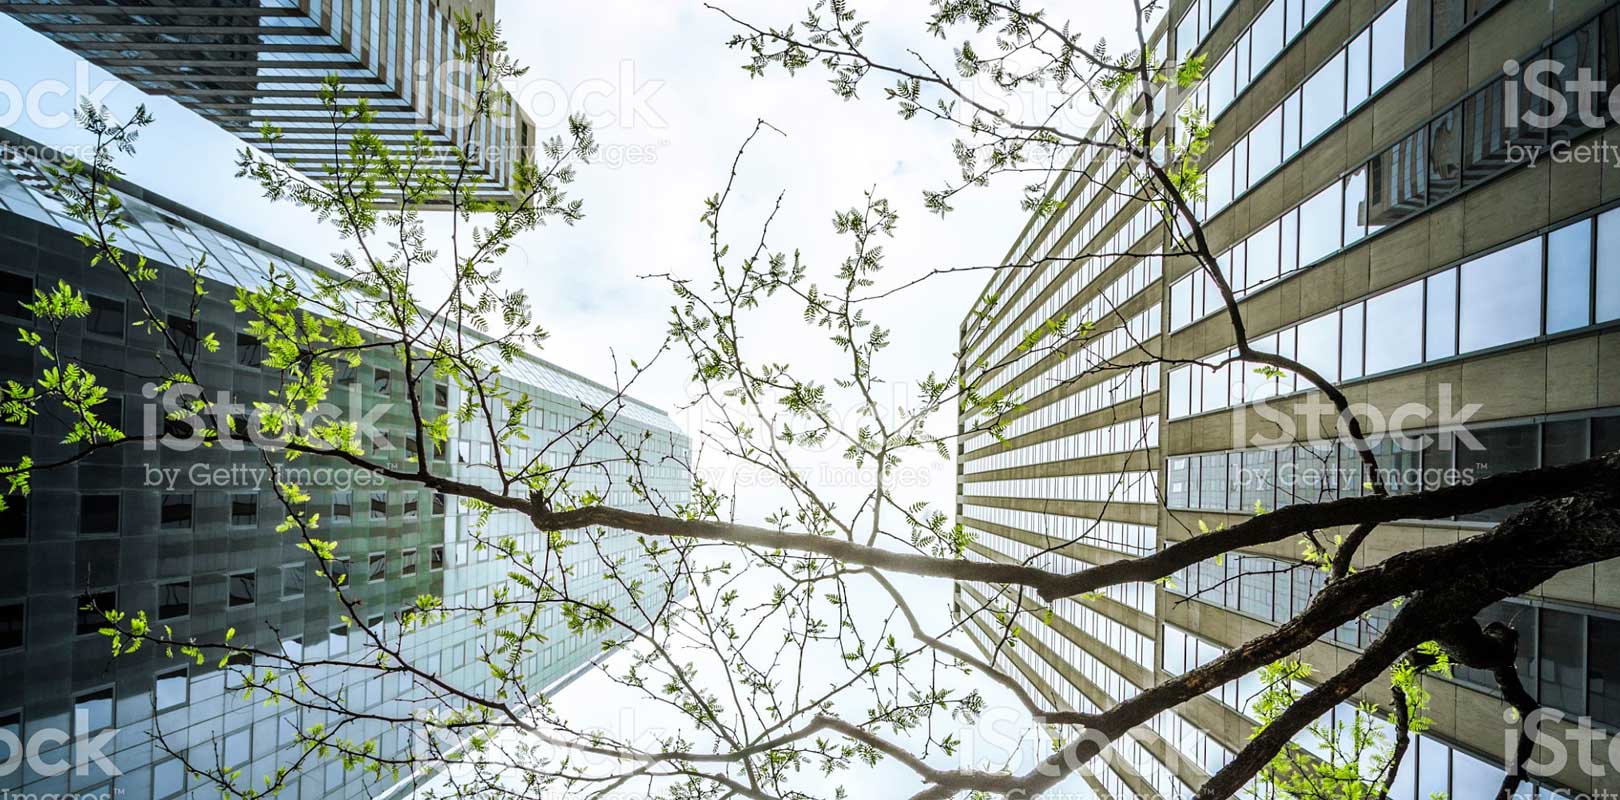 Skyscraper offices view through leaves on a tree